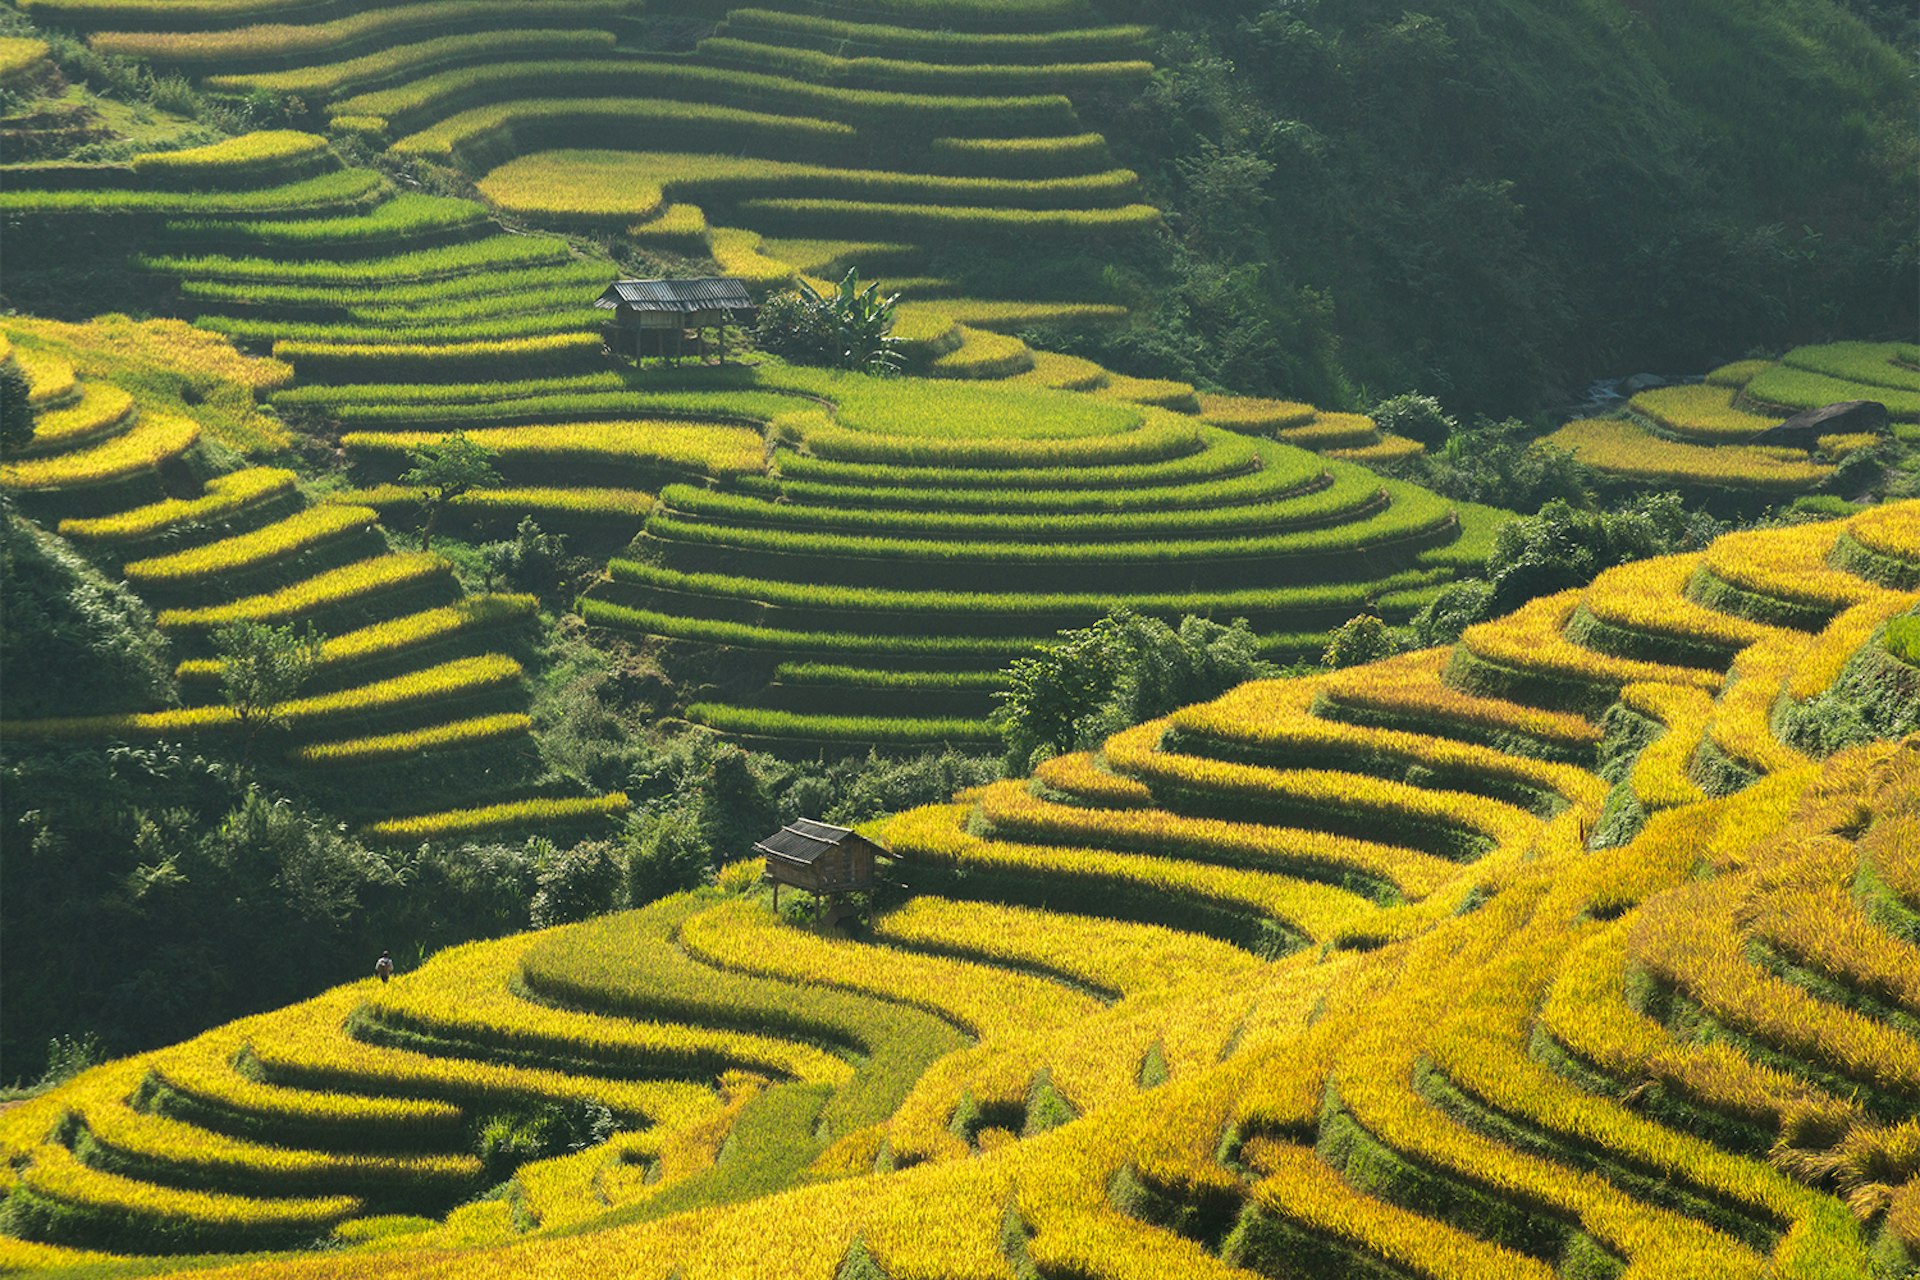 Rice terraces in Yuanyang, China © Nutexzles / Getty Images